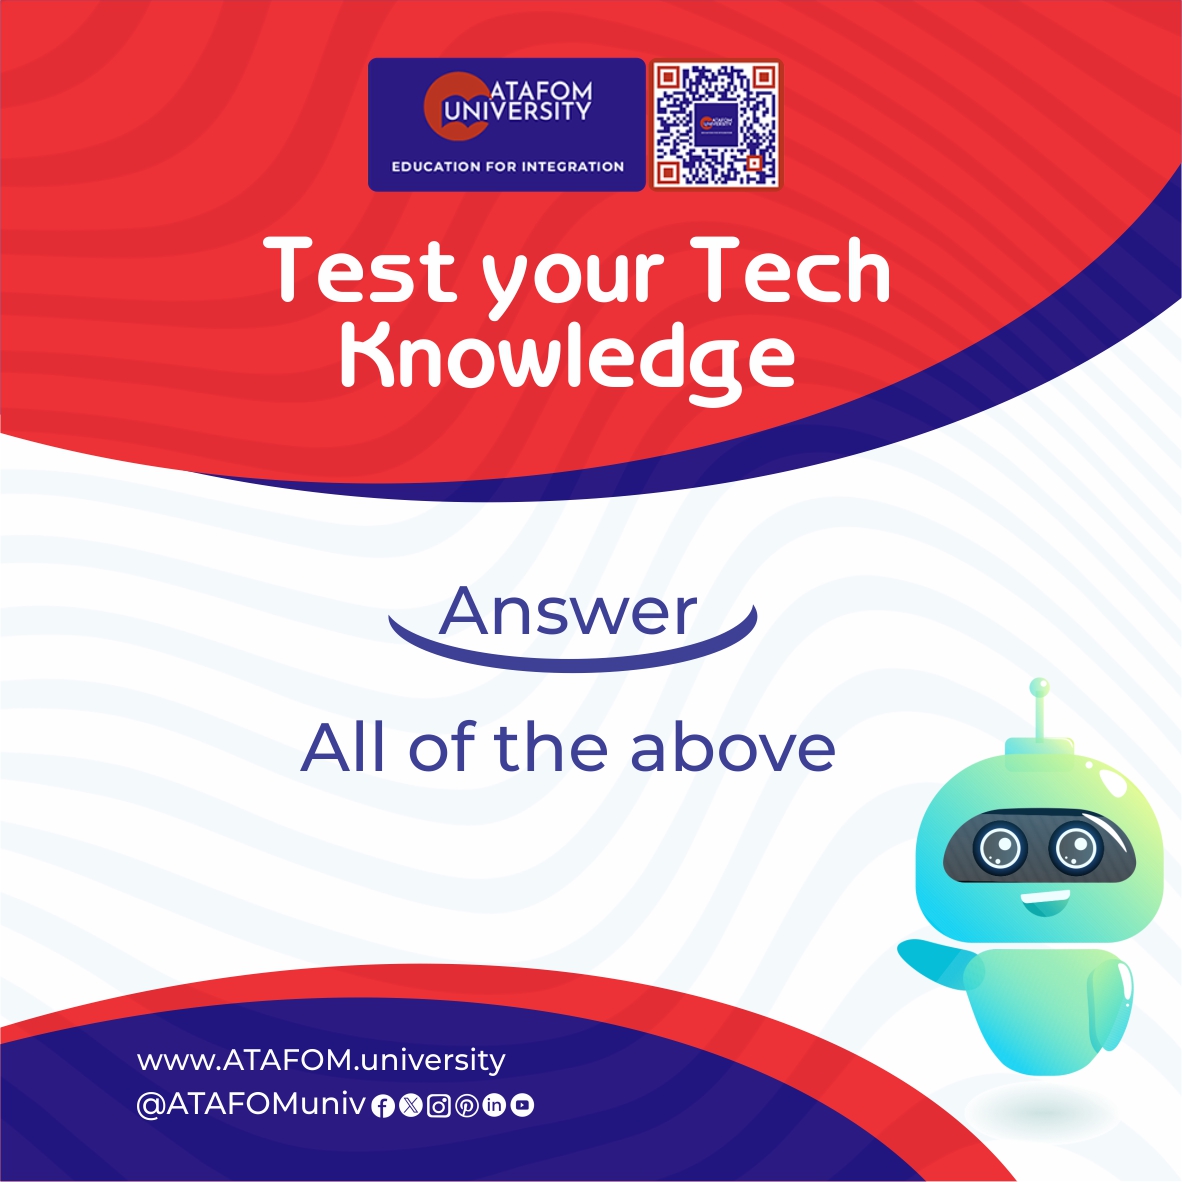 Can you crack our latest tech challenge? 

Put your wits to the test and enhance your skills with ATAFOM University.

#TechTest #MindChallenge #Tech #CriticalThinking #Test #UniversityLife #ATAFOMonlinecampus #Learning #Education #Student  #bachelorcourses #education #university…